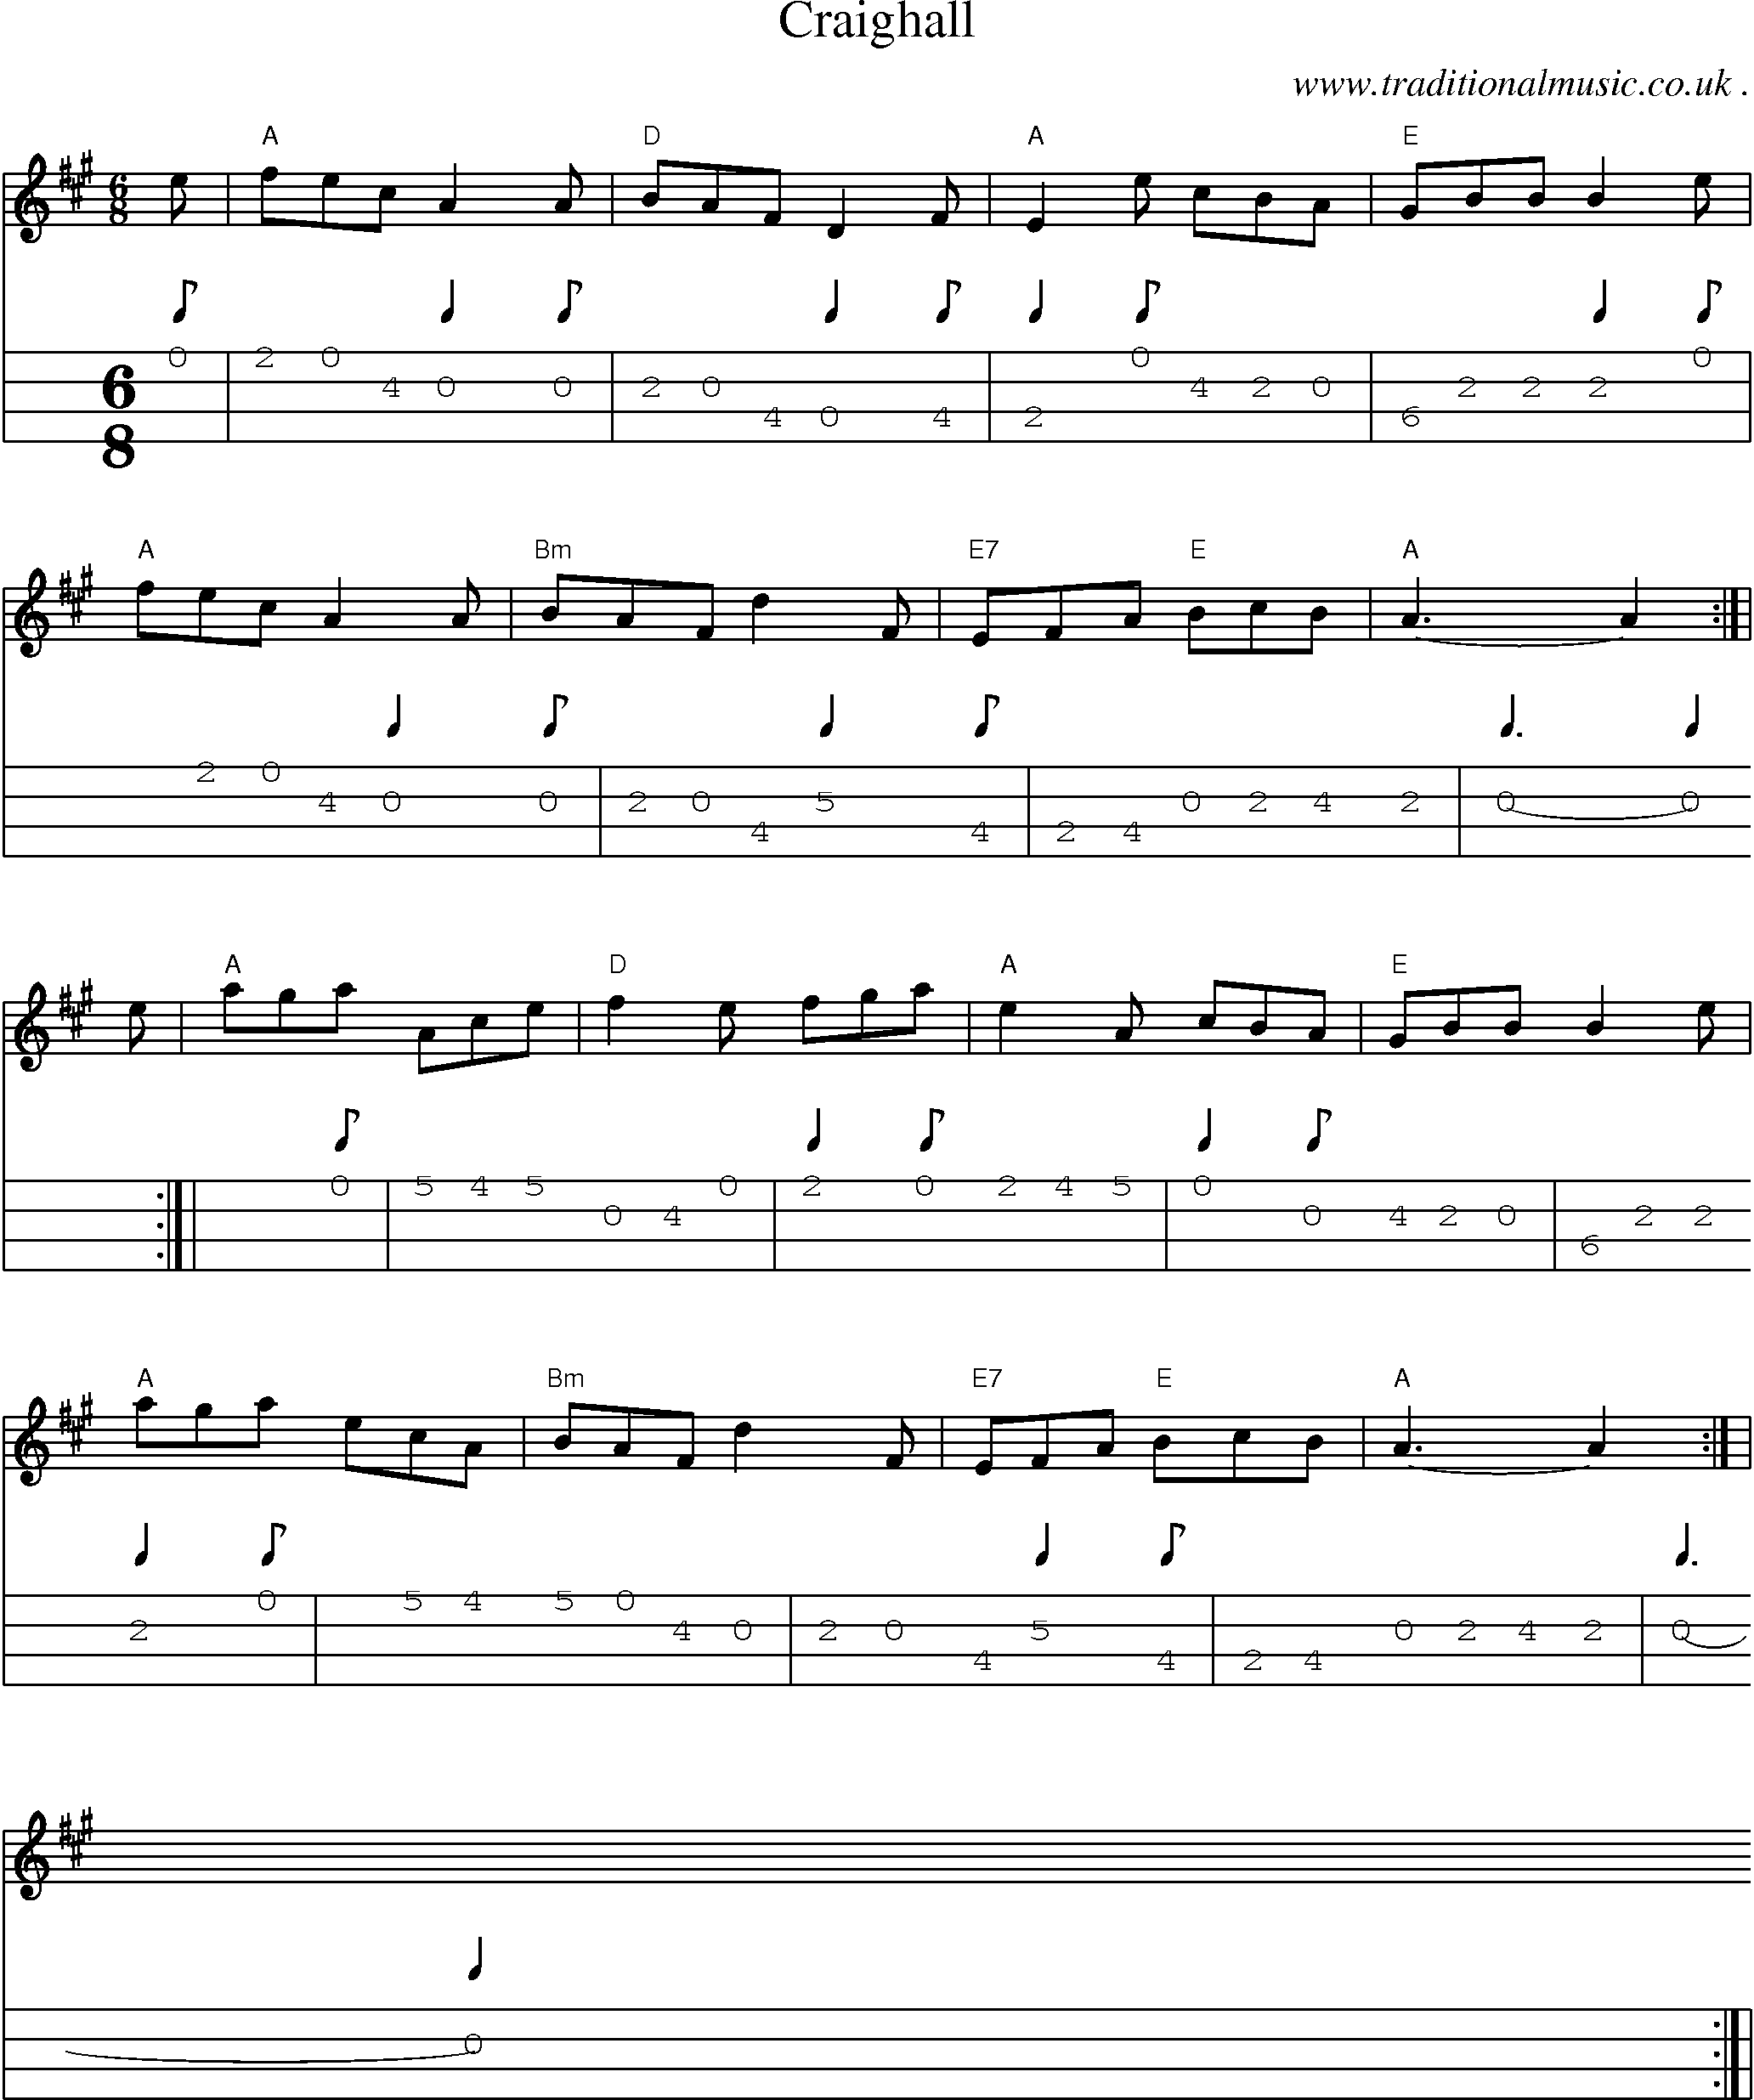 Sheet-music  score, Chords and Mandolin Tabs for Craighall